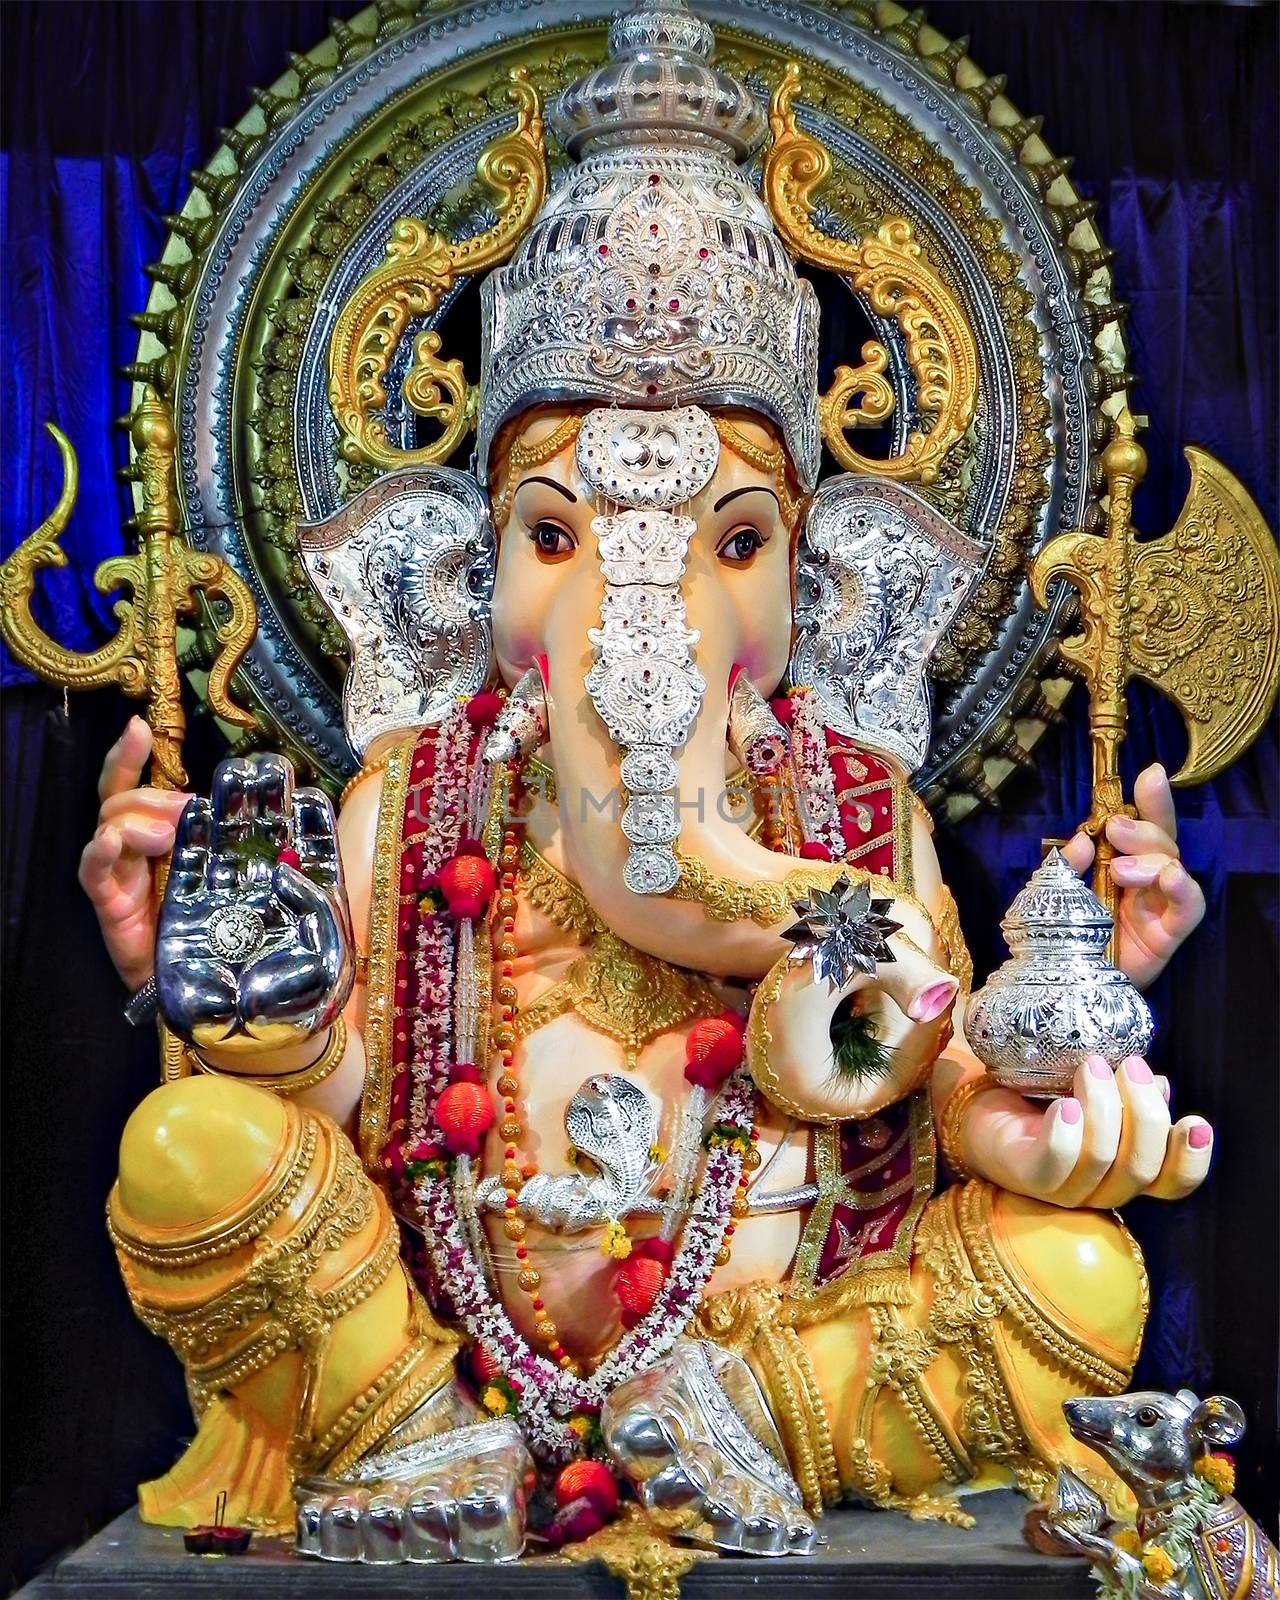 Portrait , closeup view of decorated and garlanded idol of Hindu God Ganesha . by lalam